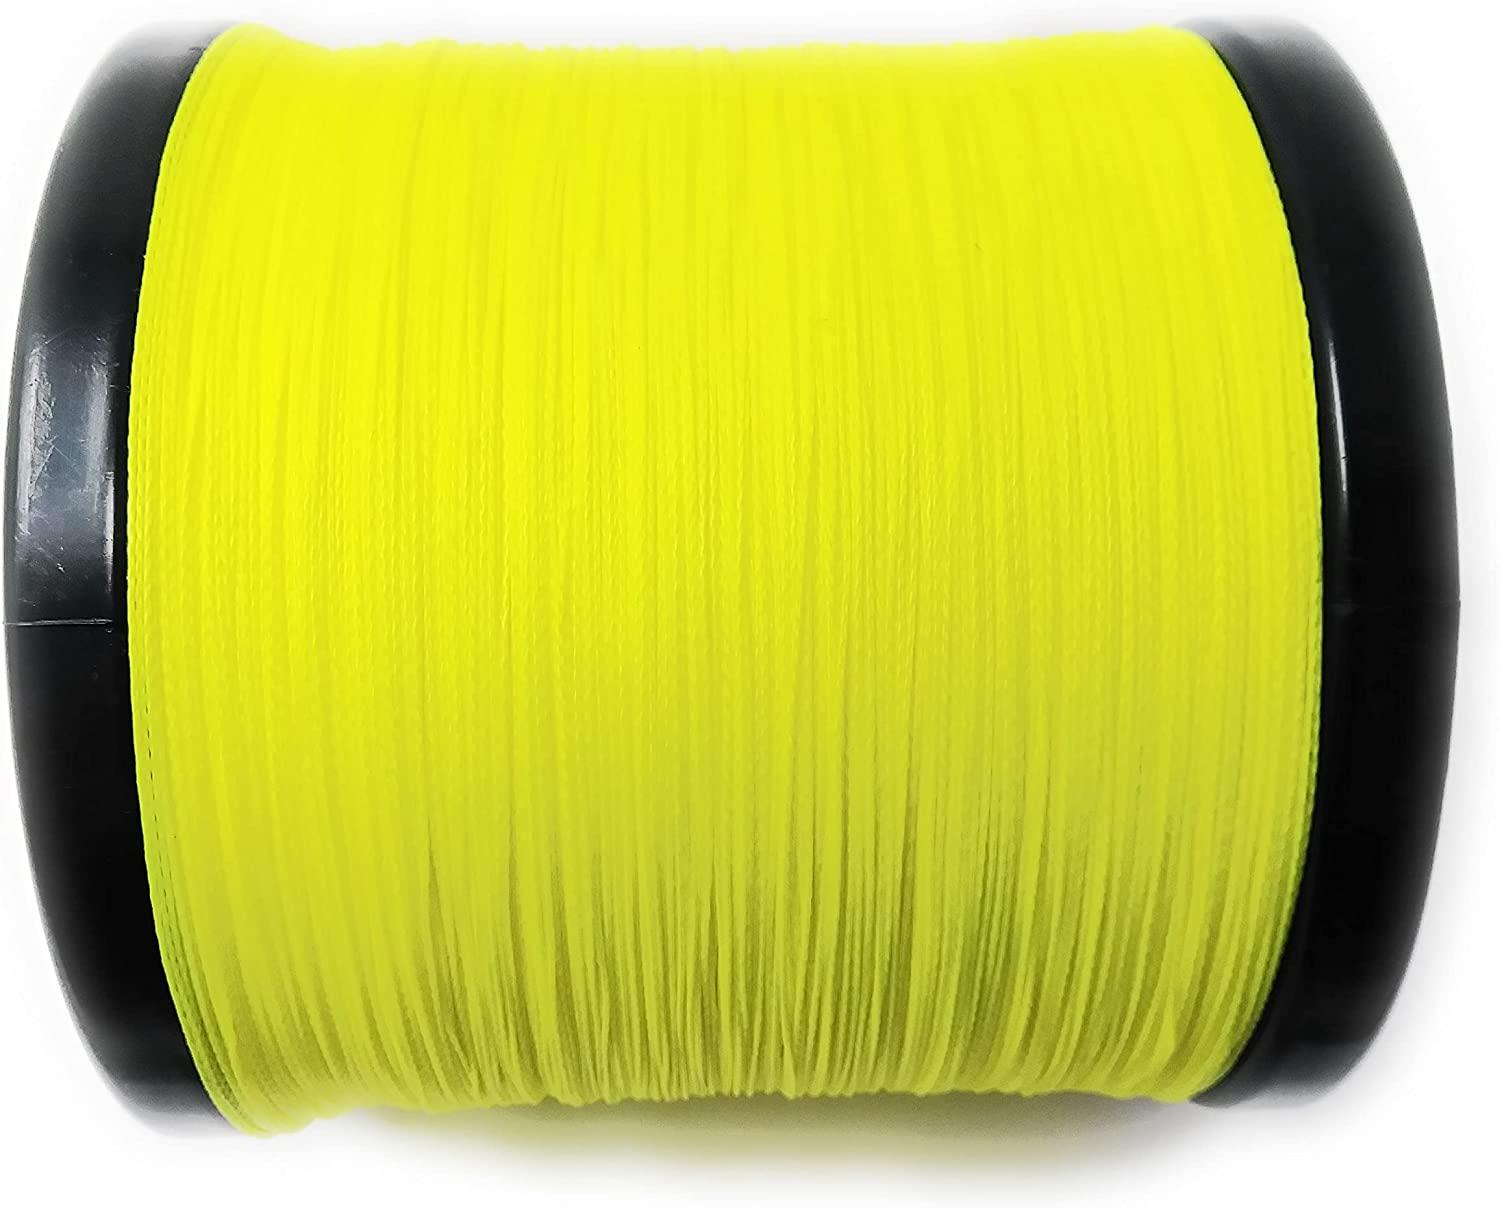 Reaction Tackle Braided Fishing Line - Pro Grade Power Performance for  Saltwater or Freshwater - Colored Diamond Braid for Extra Visibility Hi Vis  Yellow 30 LB (500 yards)